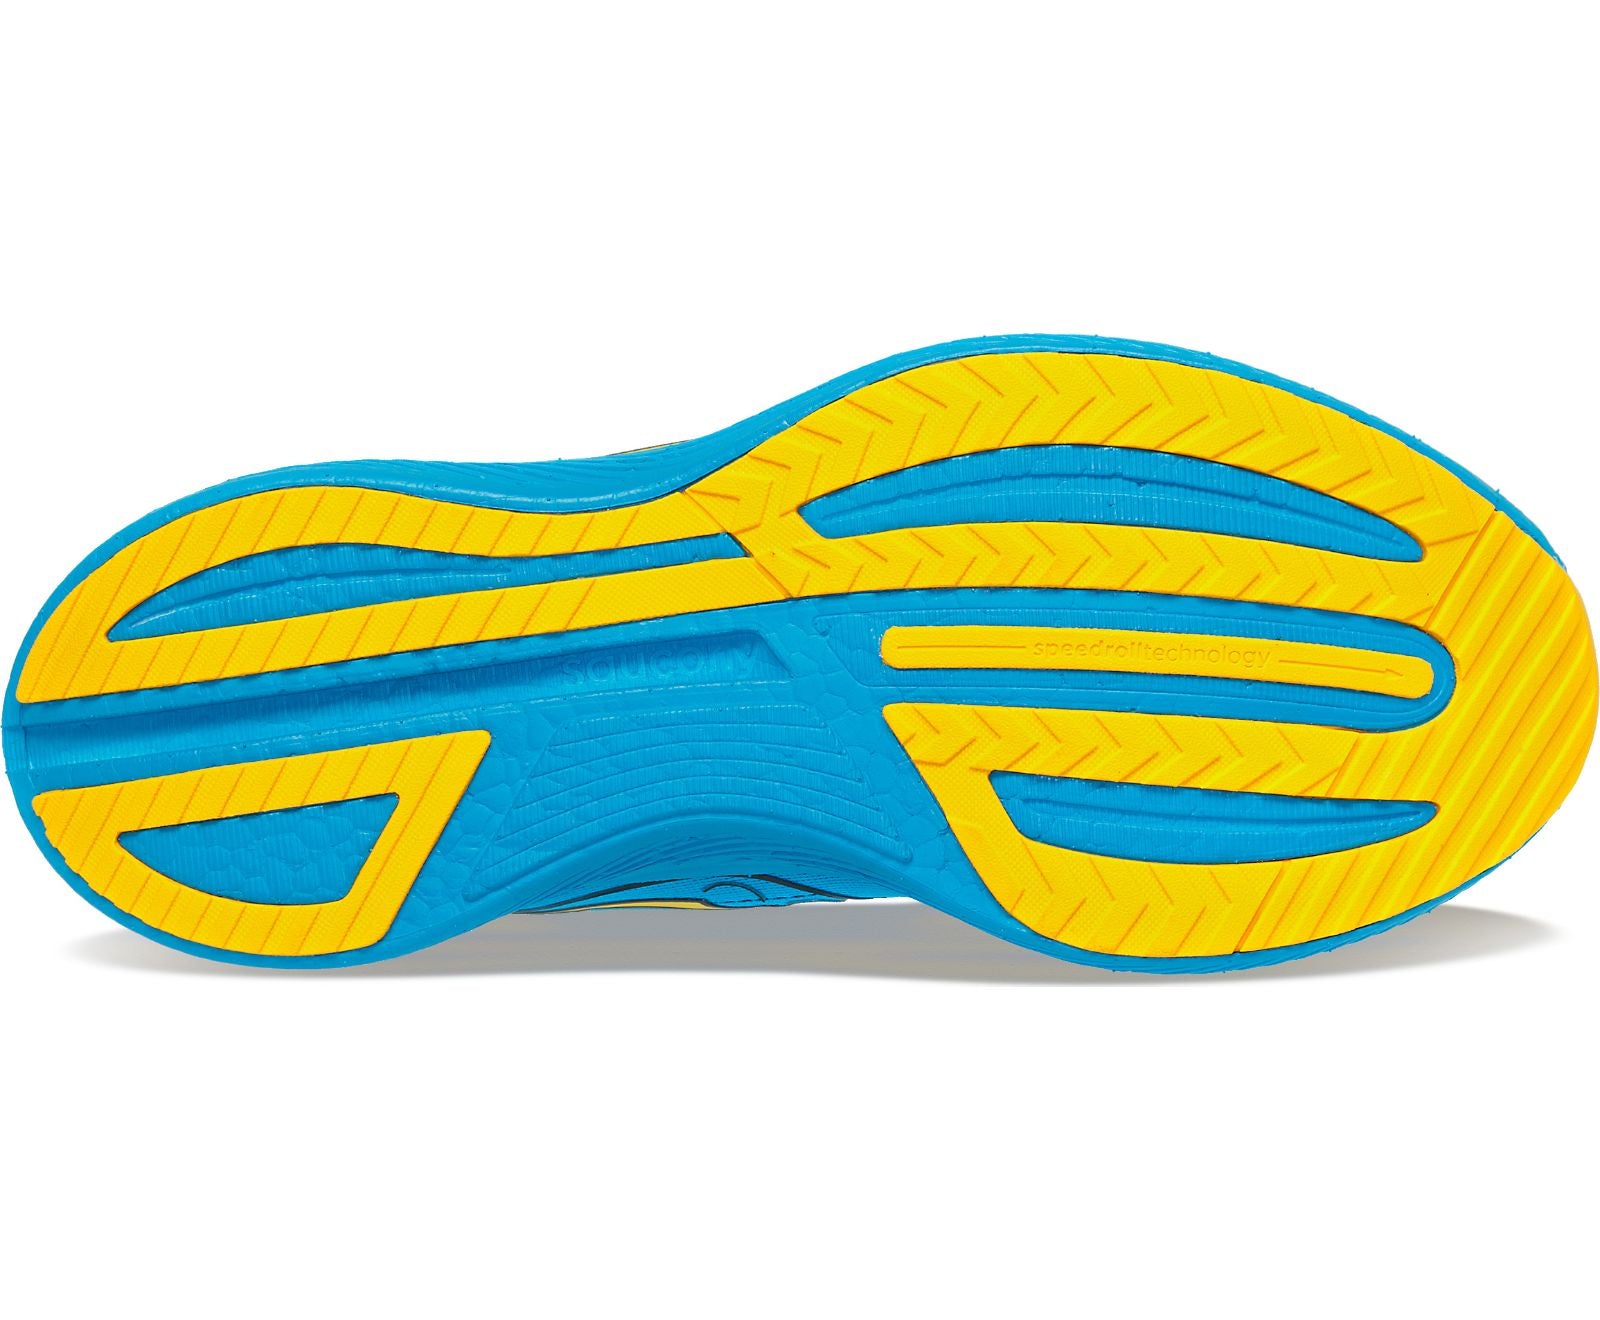 Bottom (outer sole) view of the Men's Saucony Endorphin Speed 3 in the color ocean/vizigold